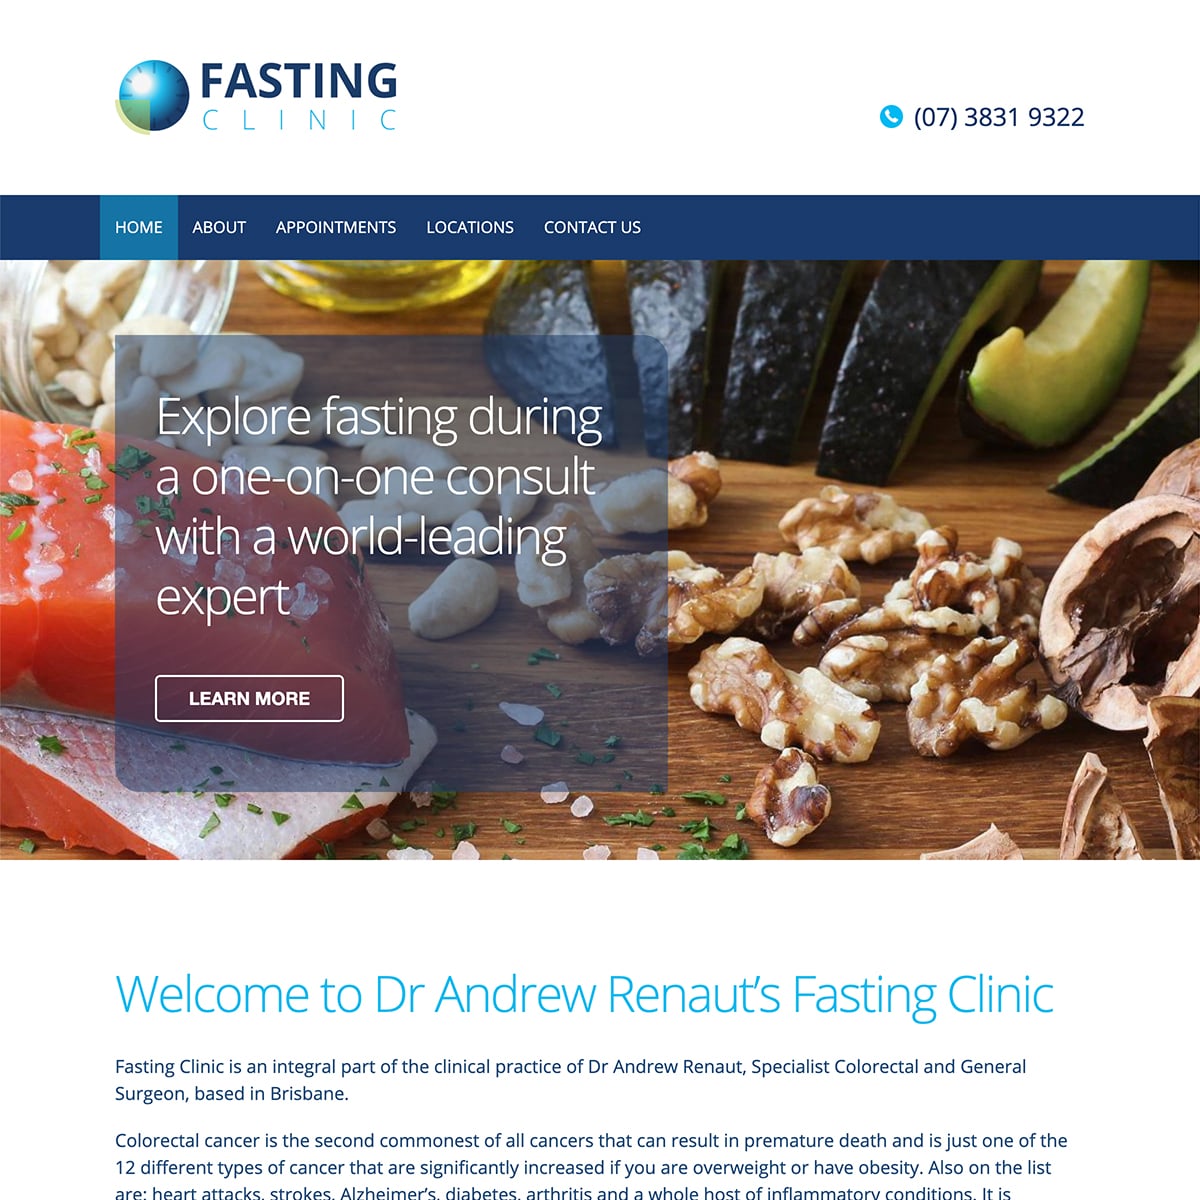 Fasting Clinic - Homepage Banners